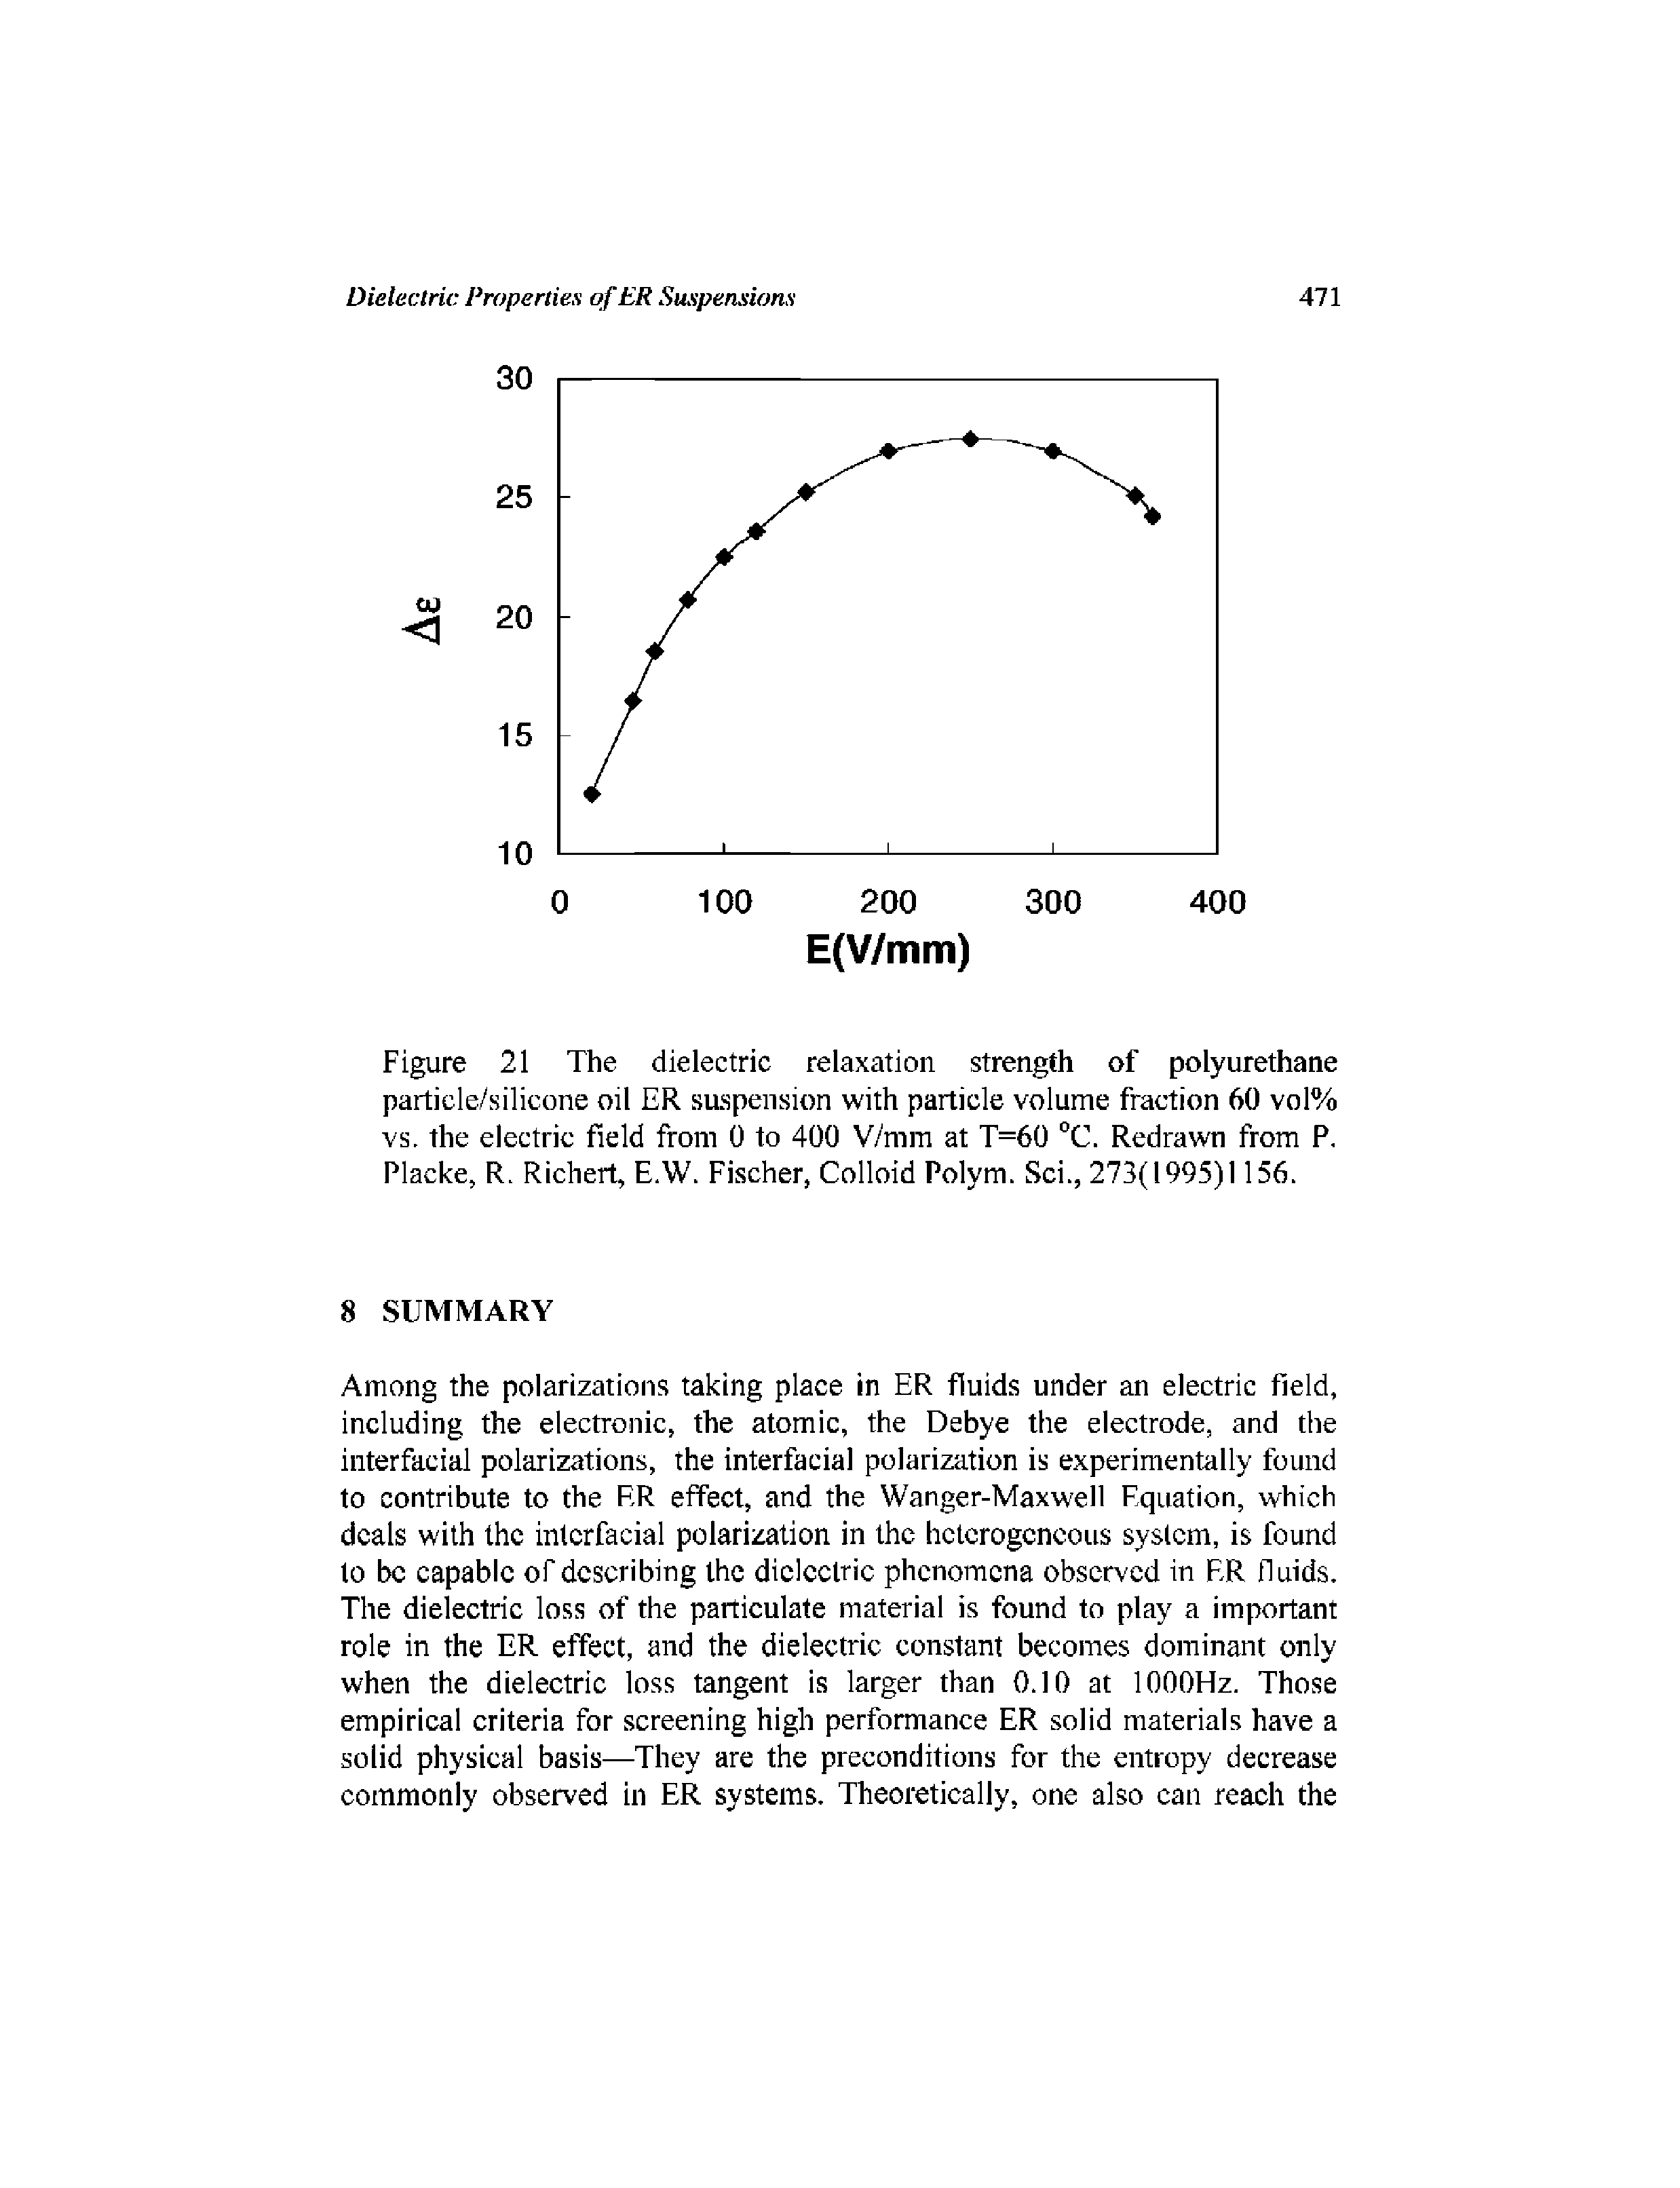 Figure 21 The dielectric relaxation strength of polyurethane particle/silicone oil ER saspeiision with particle volume fraction 60 vol% vs. the electric field from 0 to 400 V/mm at T=60 °C. Redrawn from P. Placke, R. Richert, E.W. Fischer, Colloid Polym. Sci., 273(1995)1156.